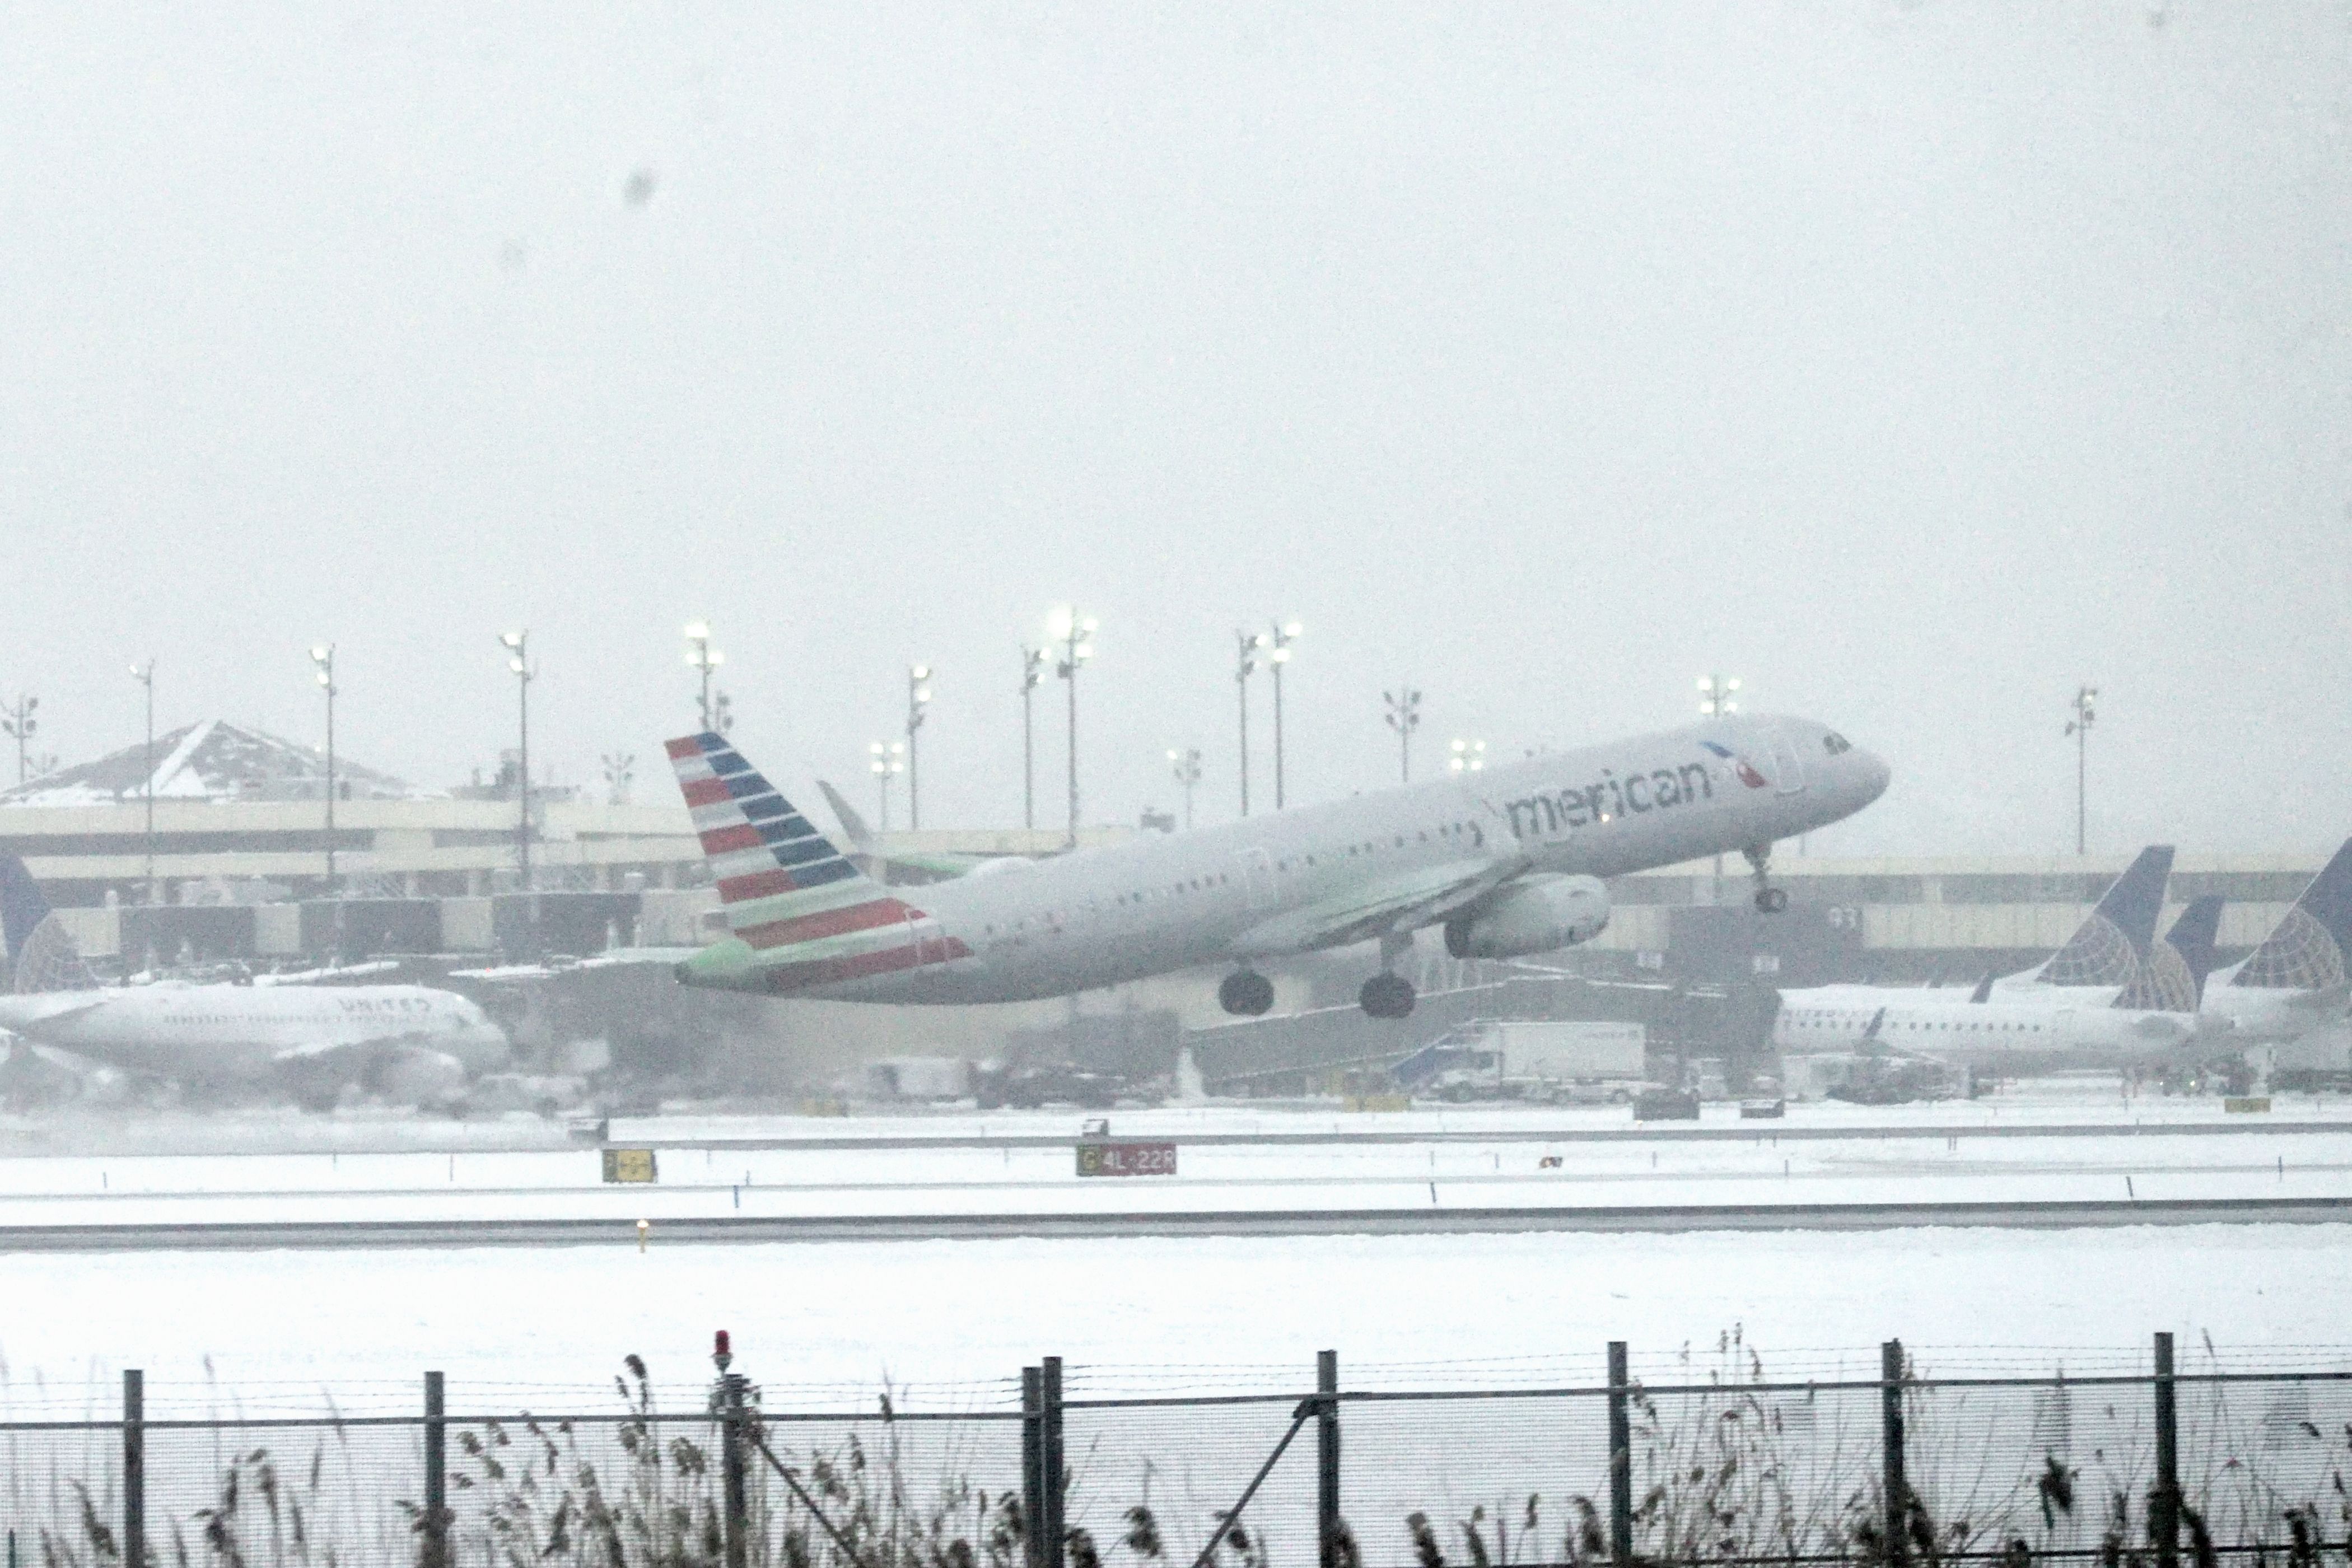 American Airlines Aircraft Taking off at Airport